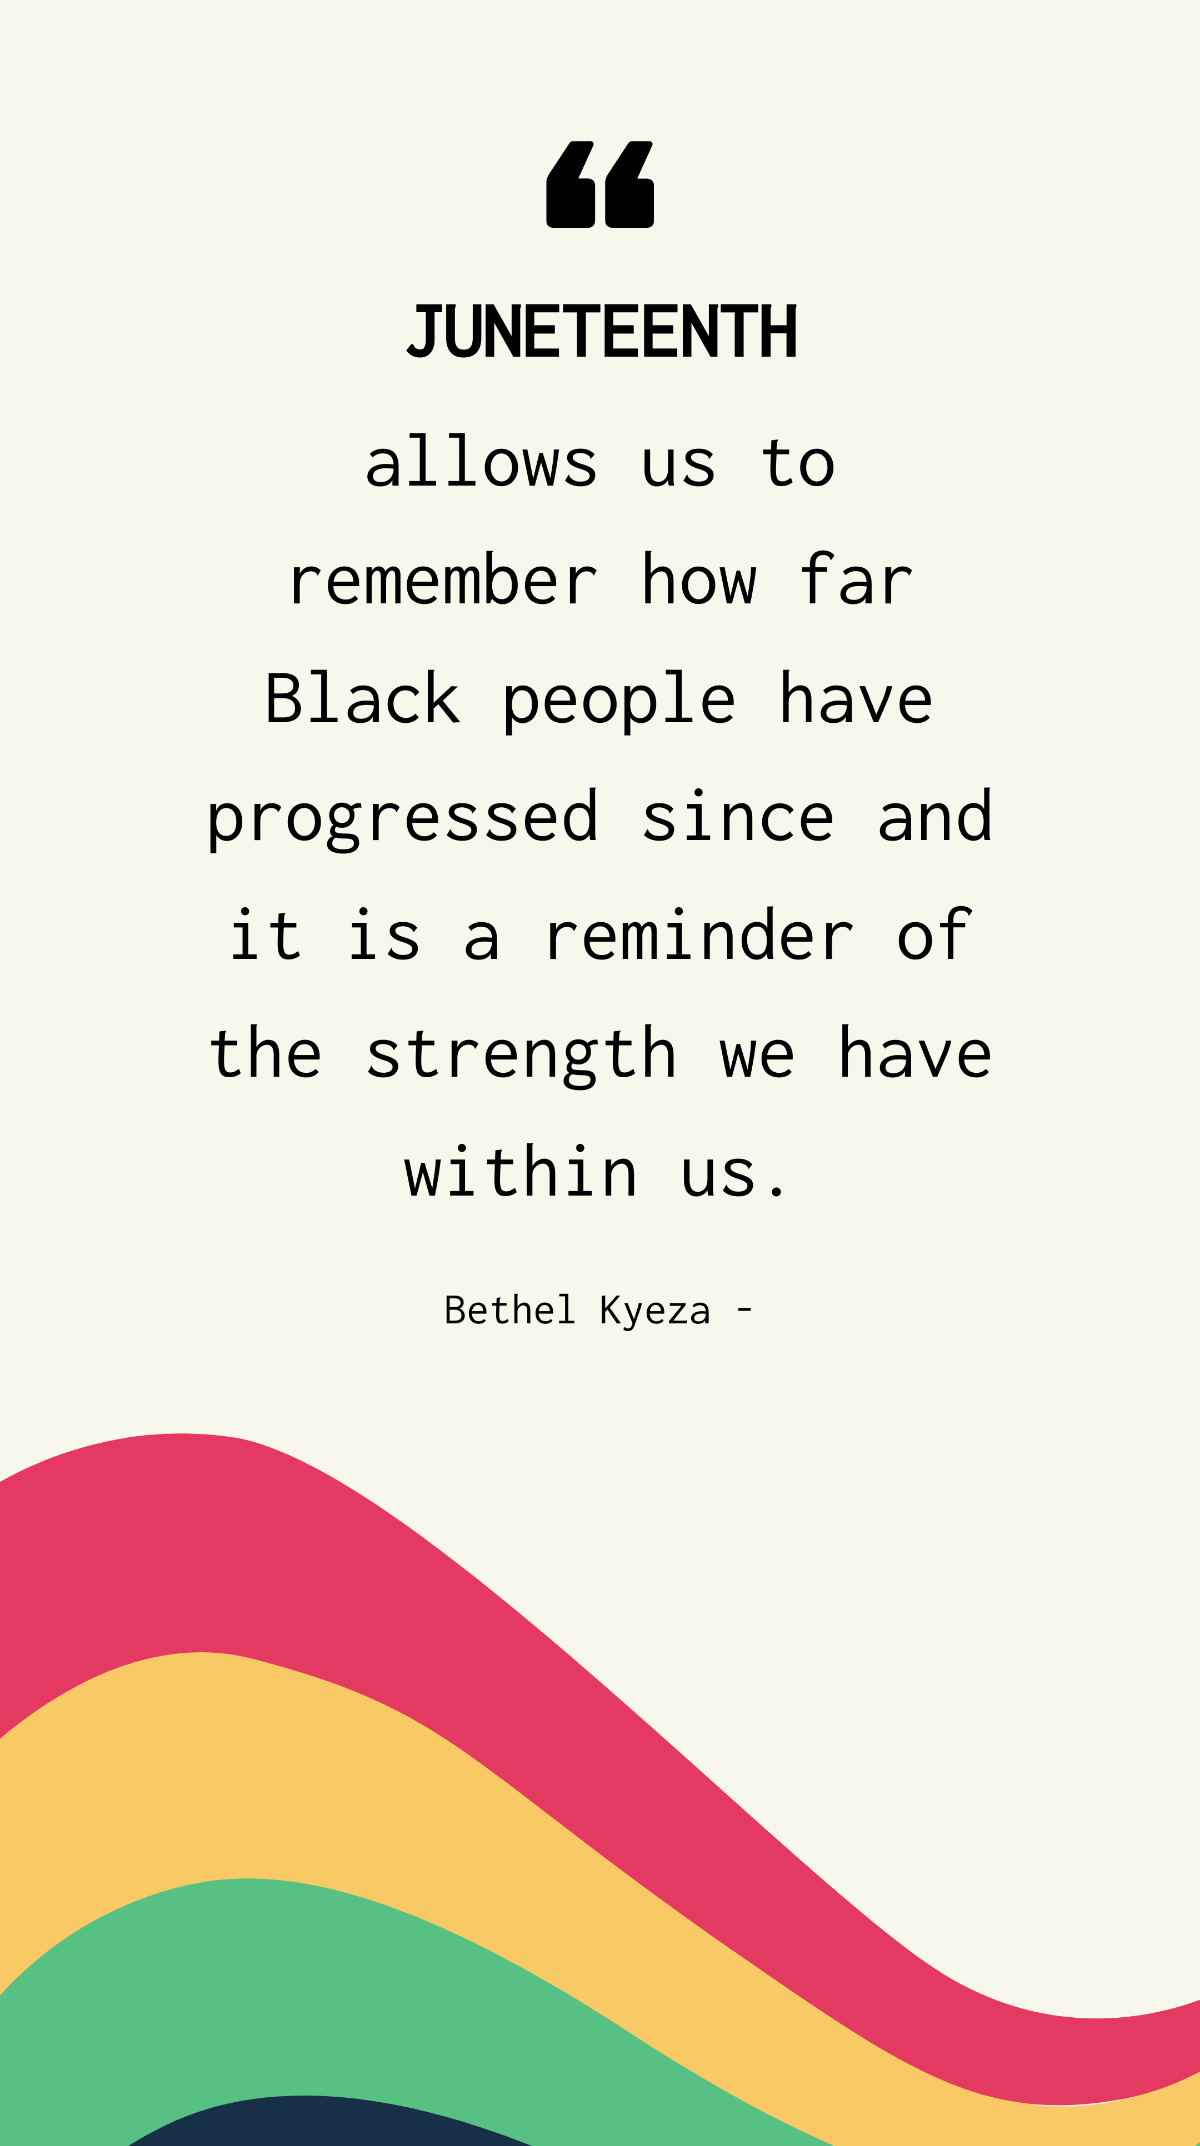 Bethel Kyeza - Juneteenth allows us to remember how far Black people have progressed since and it is a reminder of the strength we have within us.